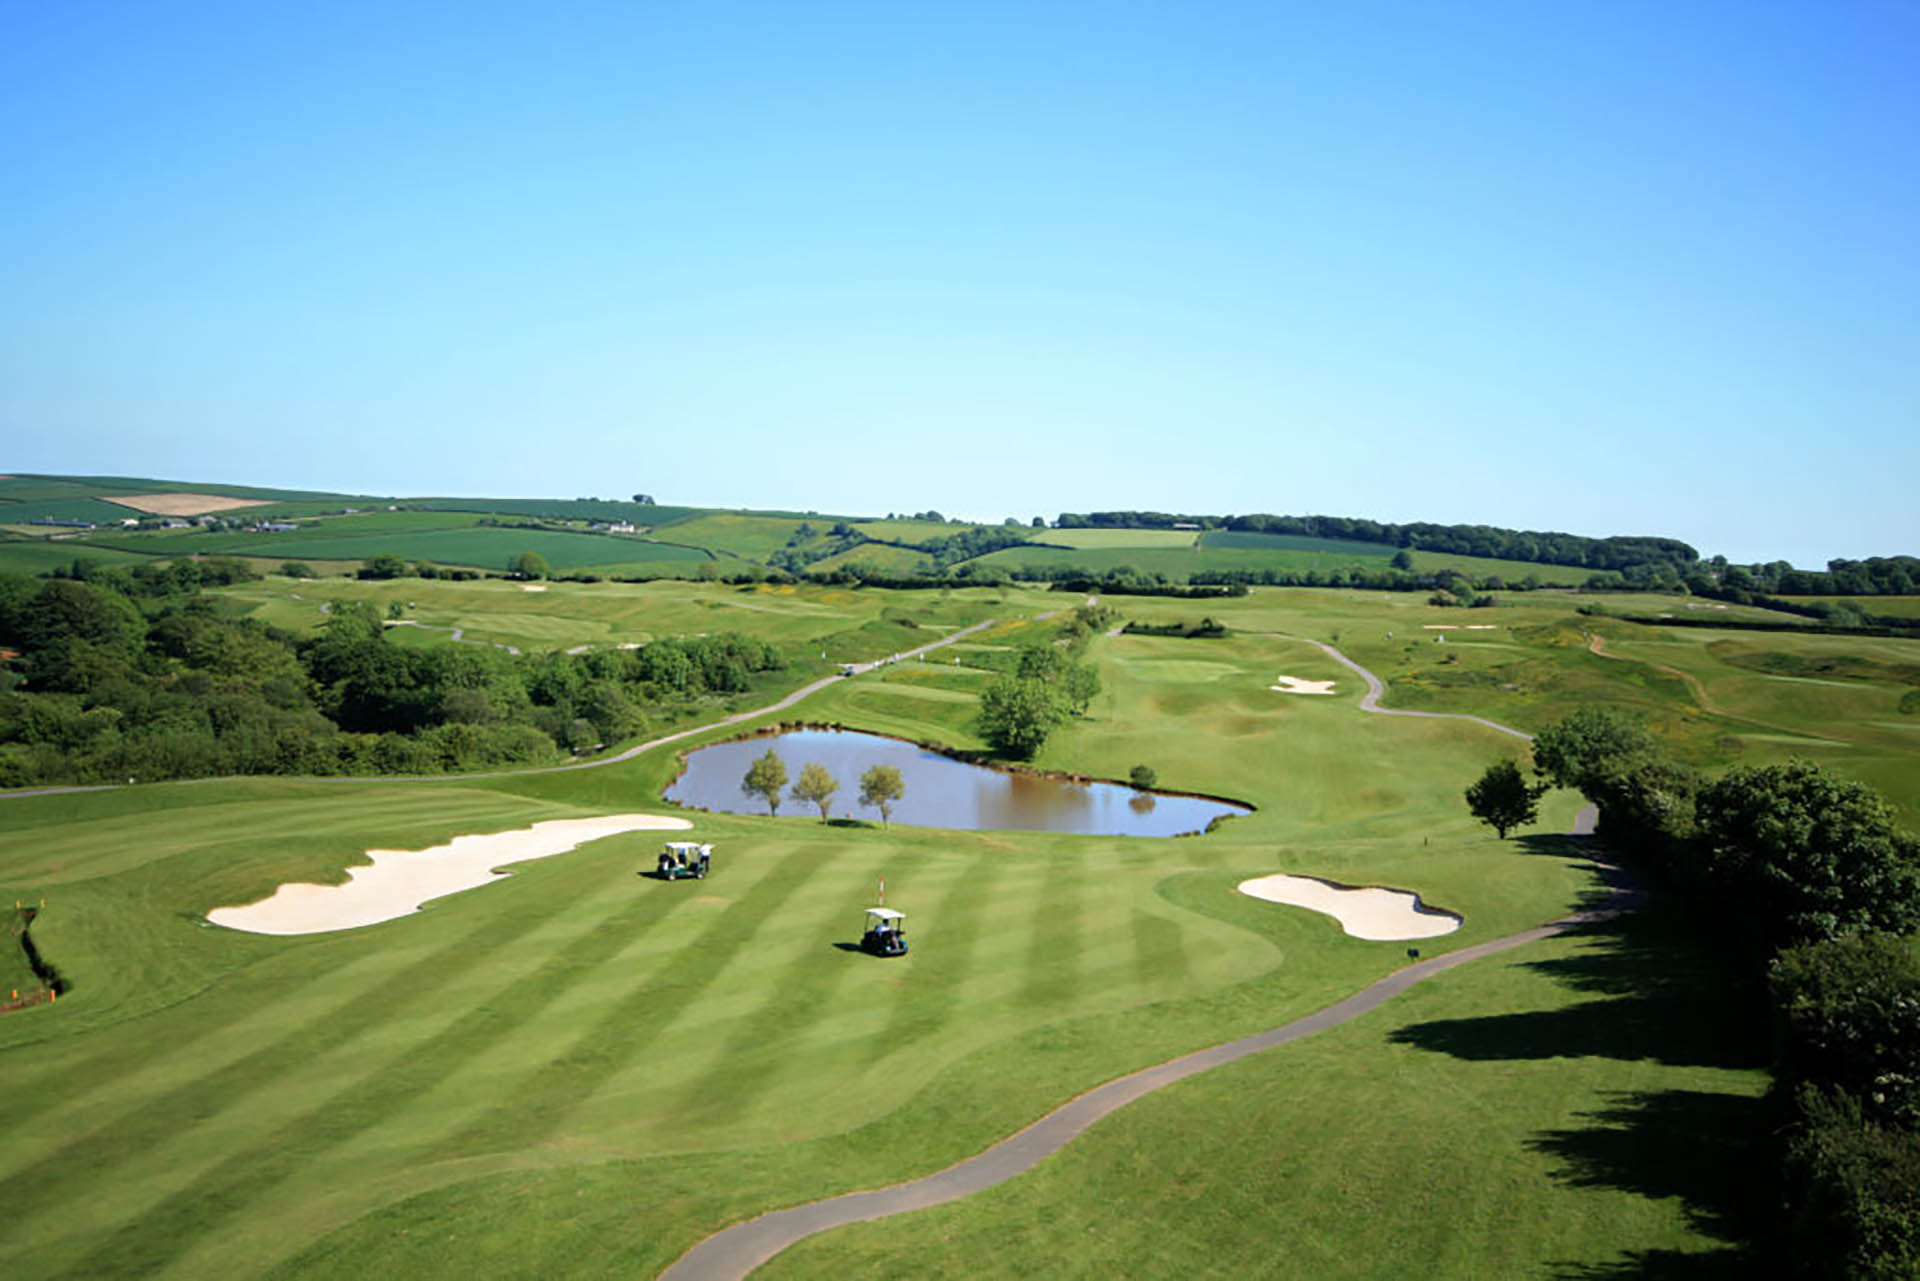 18 Holes & a Buggy Gift Experience